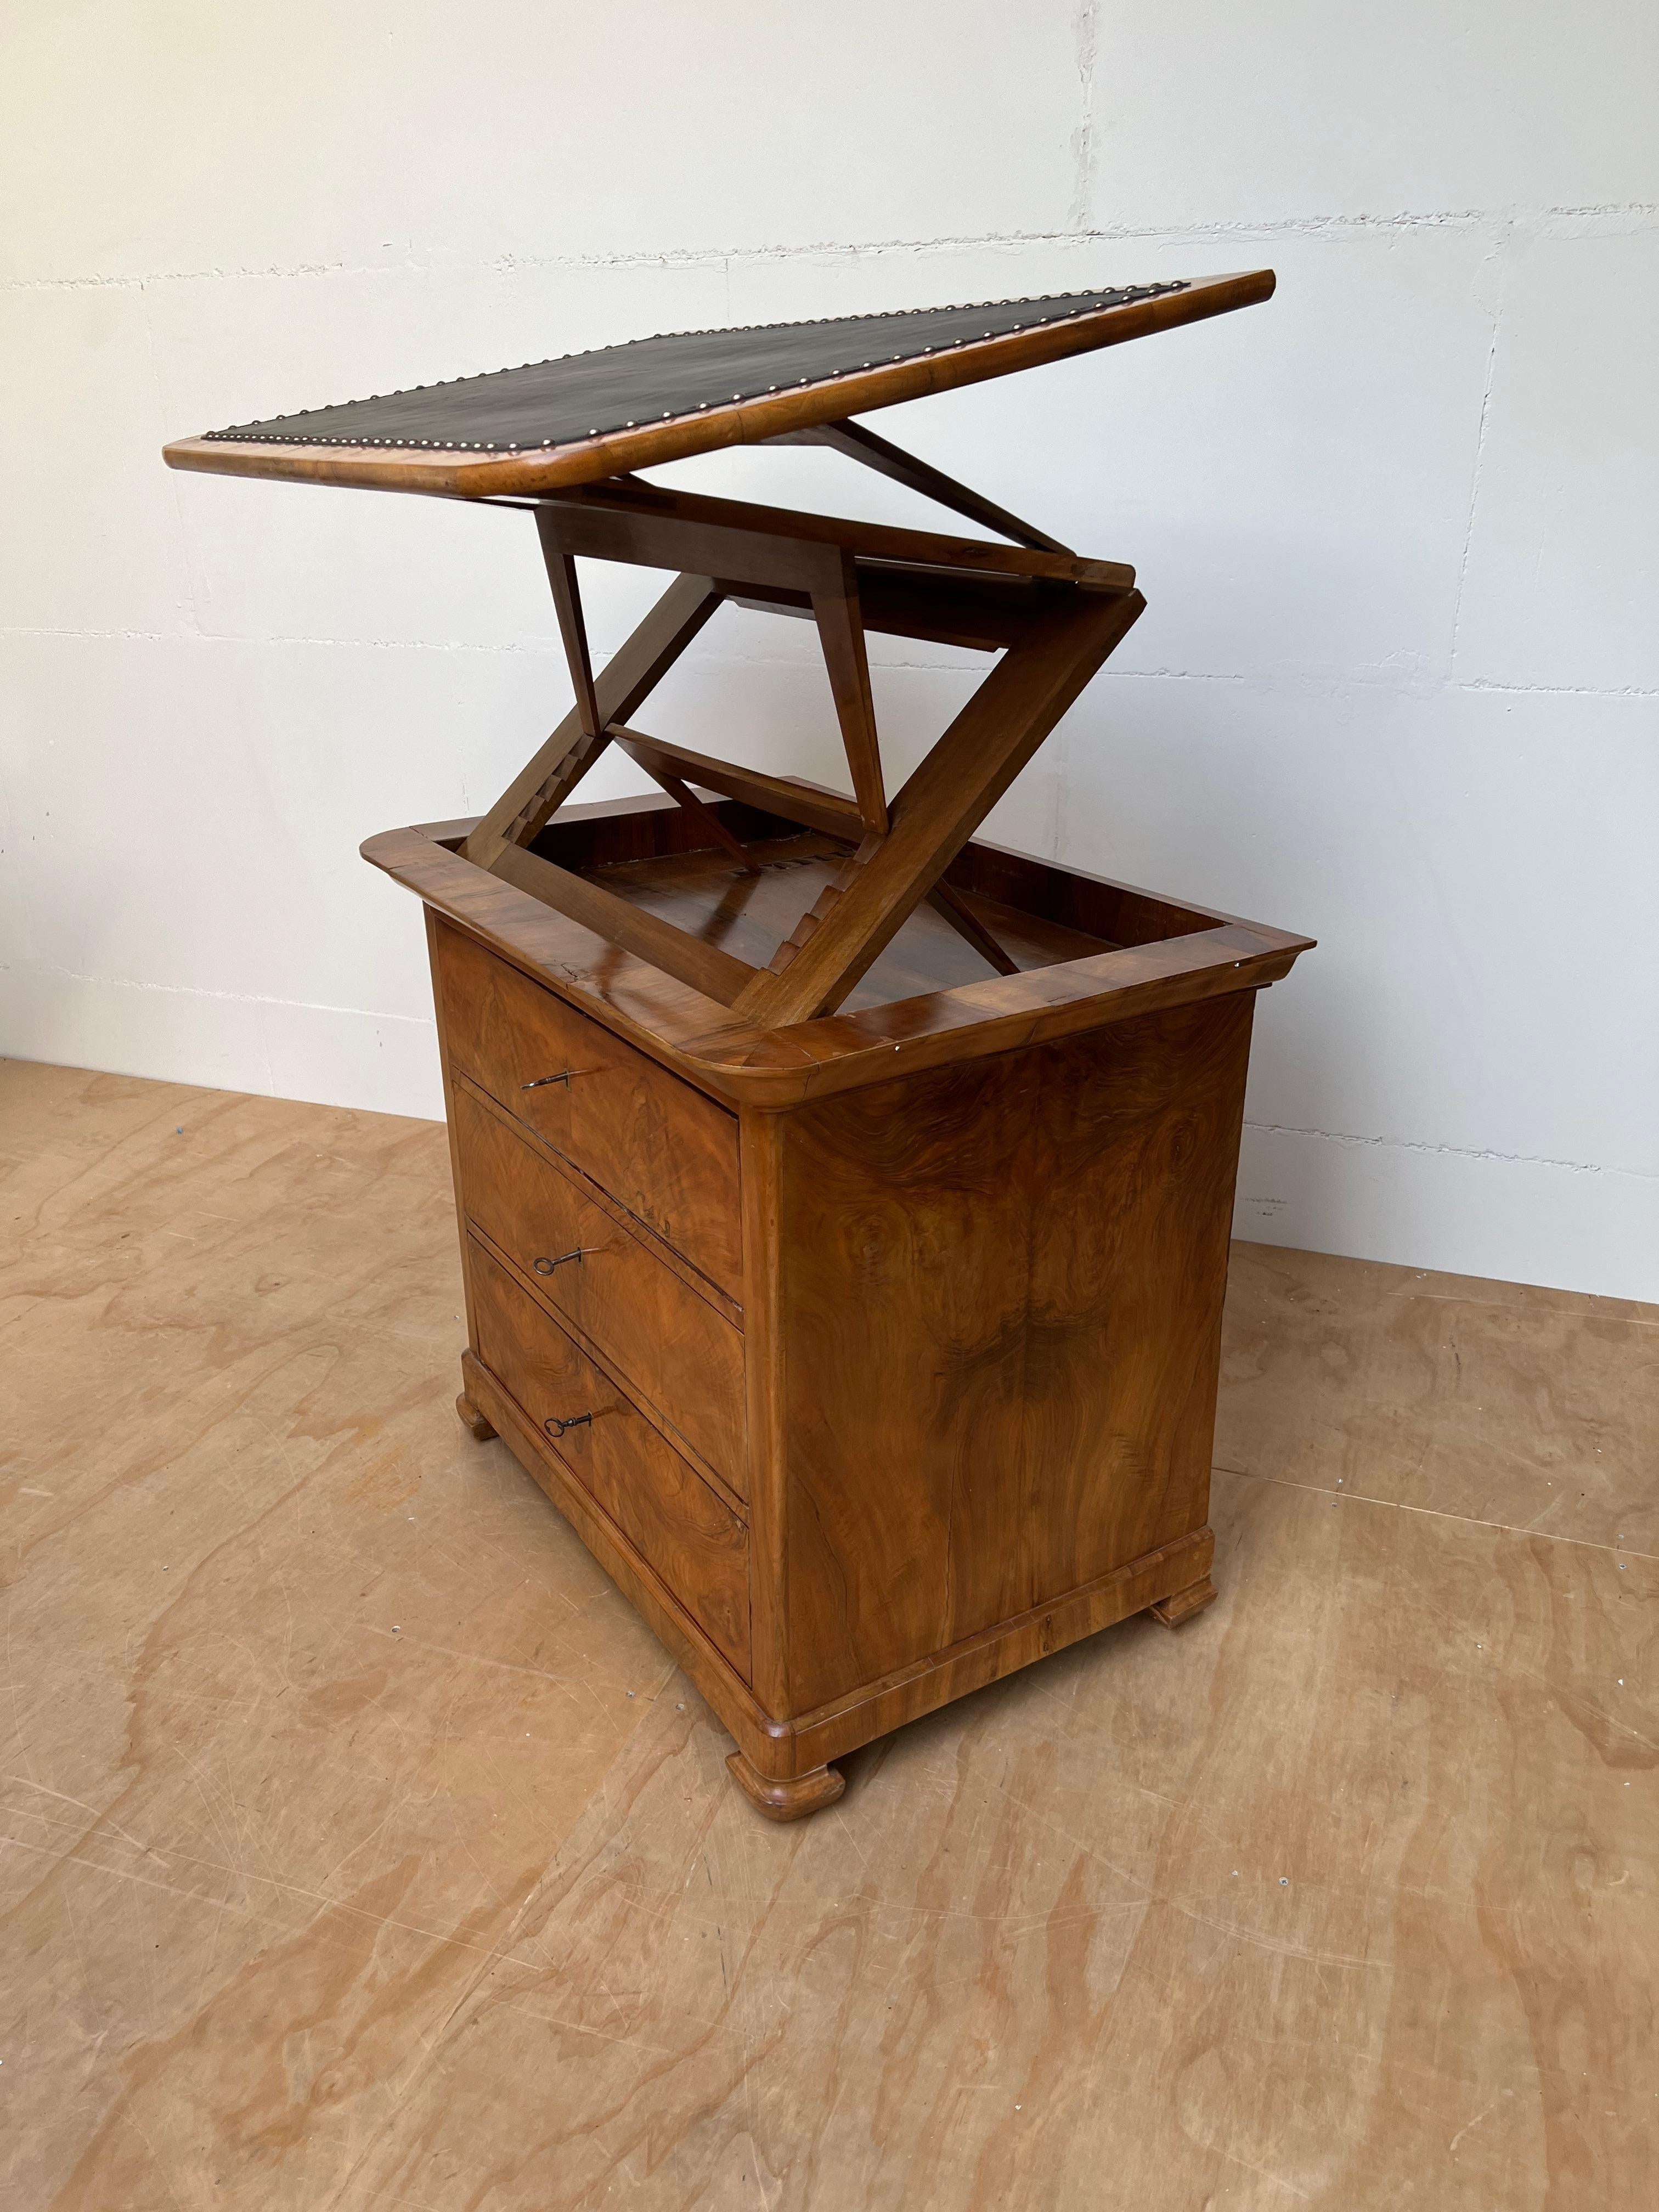 Patinated Very Rare Antique Biedermeier Walnut Architect's Drawing Table, Commode or Chest For Sale